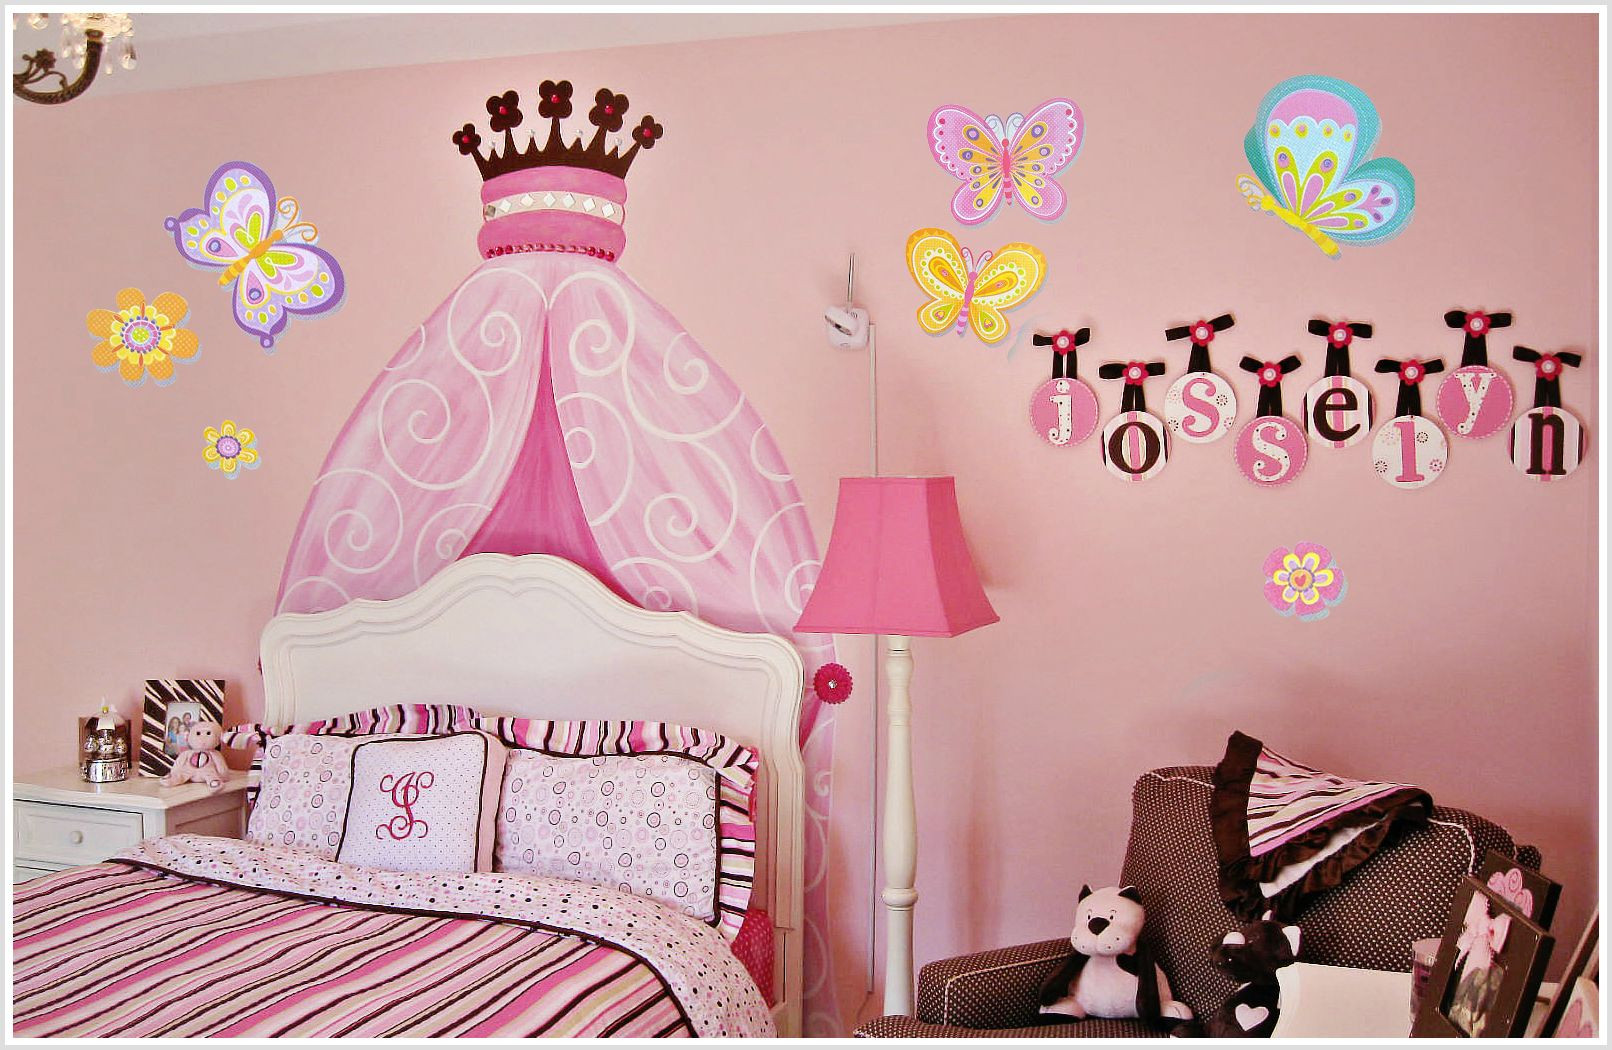 Butterfly Kids Room
 3D Removable Butterfly Art Decor Wall Stickers Kids Room